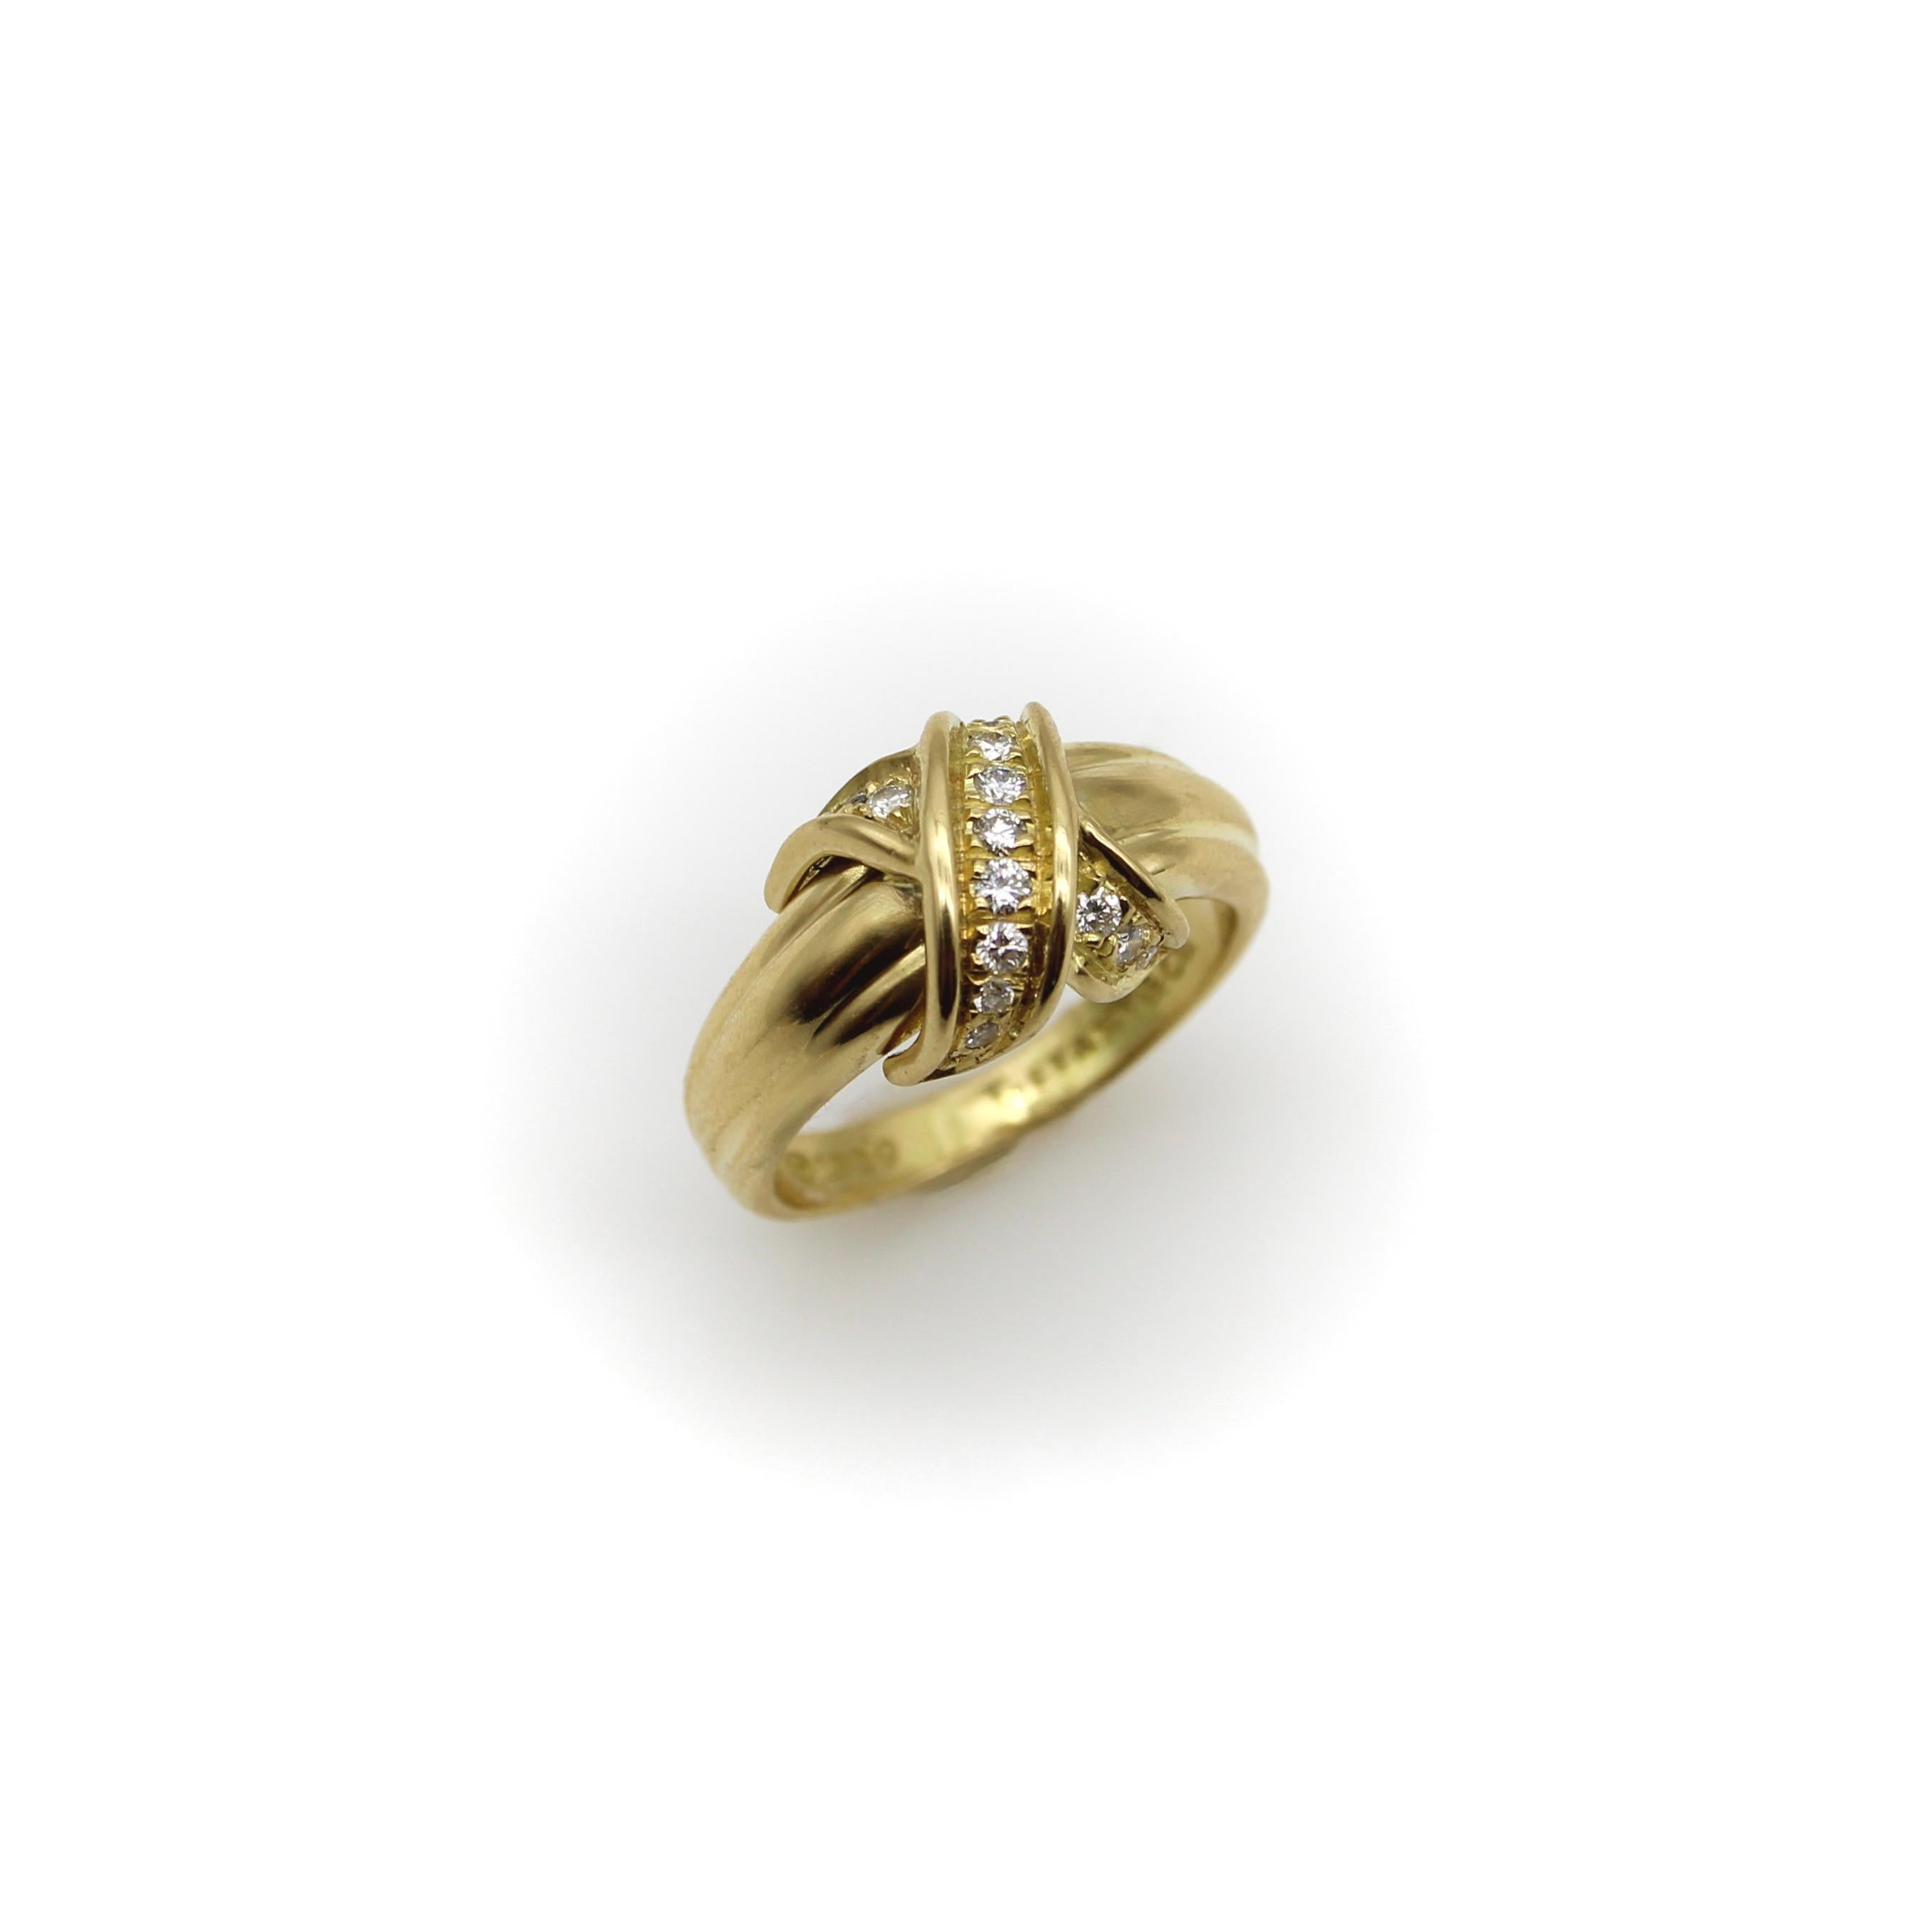 Tiffany & Co.’s signature classic “X” ring was designed by Jean Schlumberger, who famously described his aesthetic by saying “I try to make everything look as if it were growing, uneven, at random, organic, in motion.” In this 18k gold ring, a